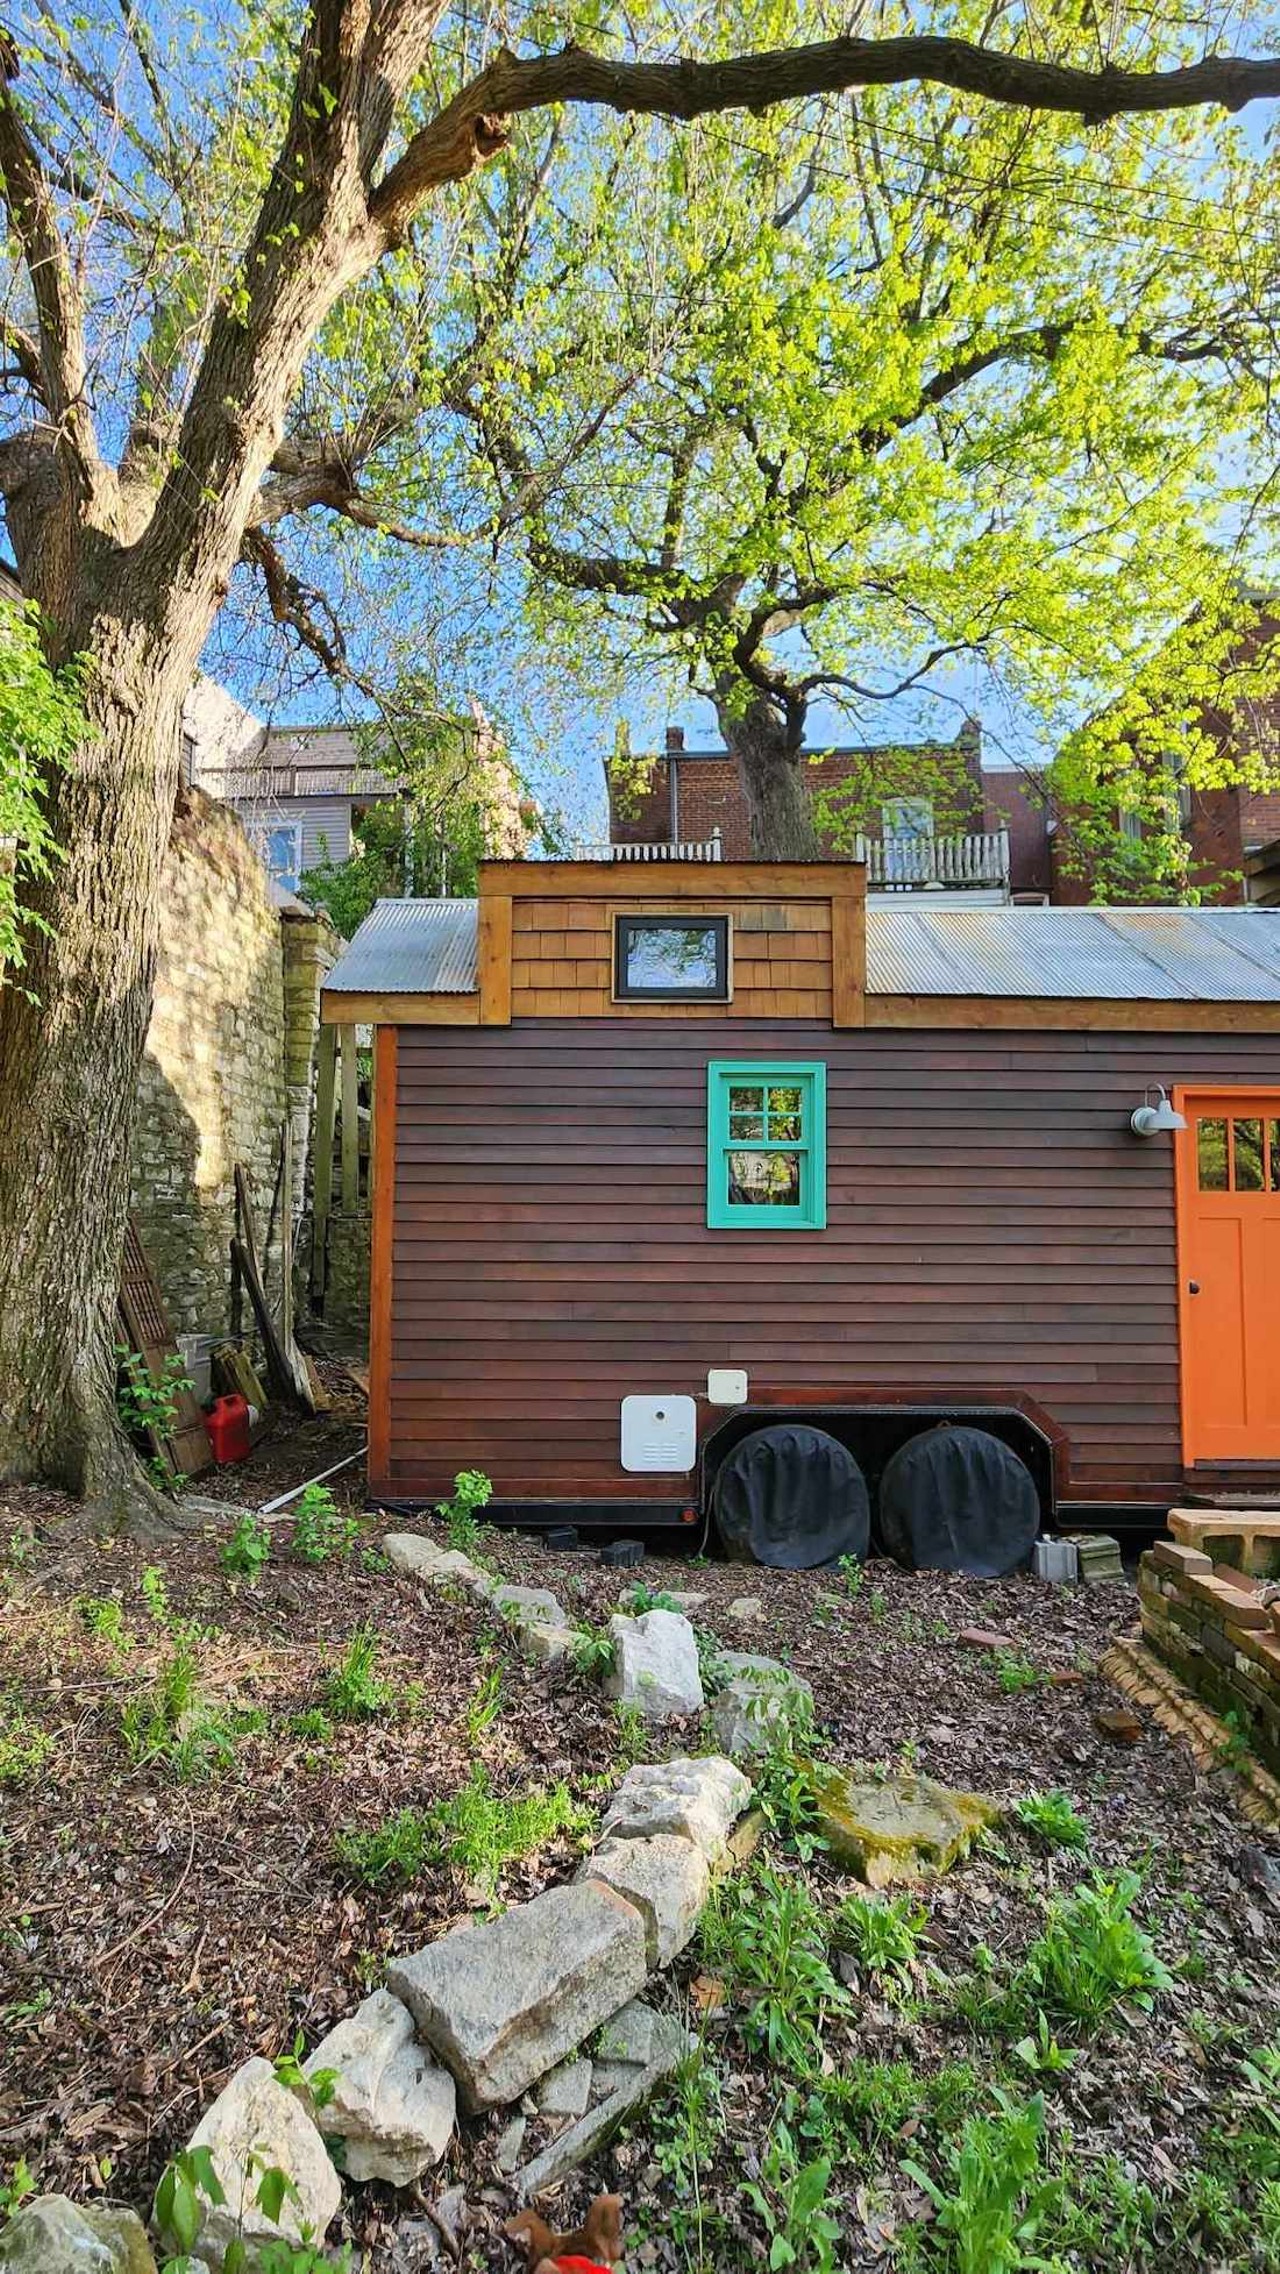 For Sale in St. Louis: A Super Tiny House